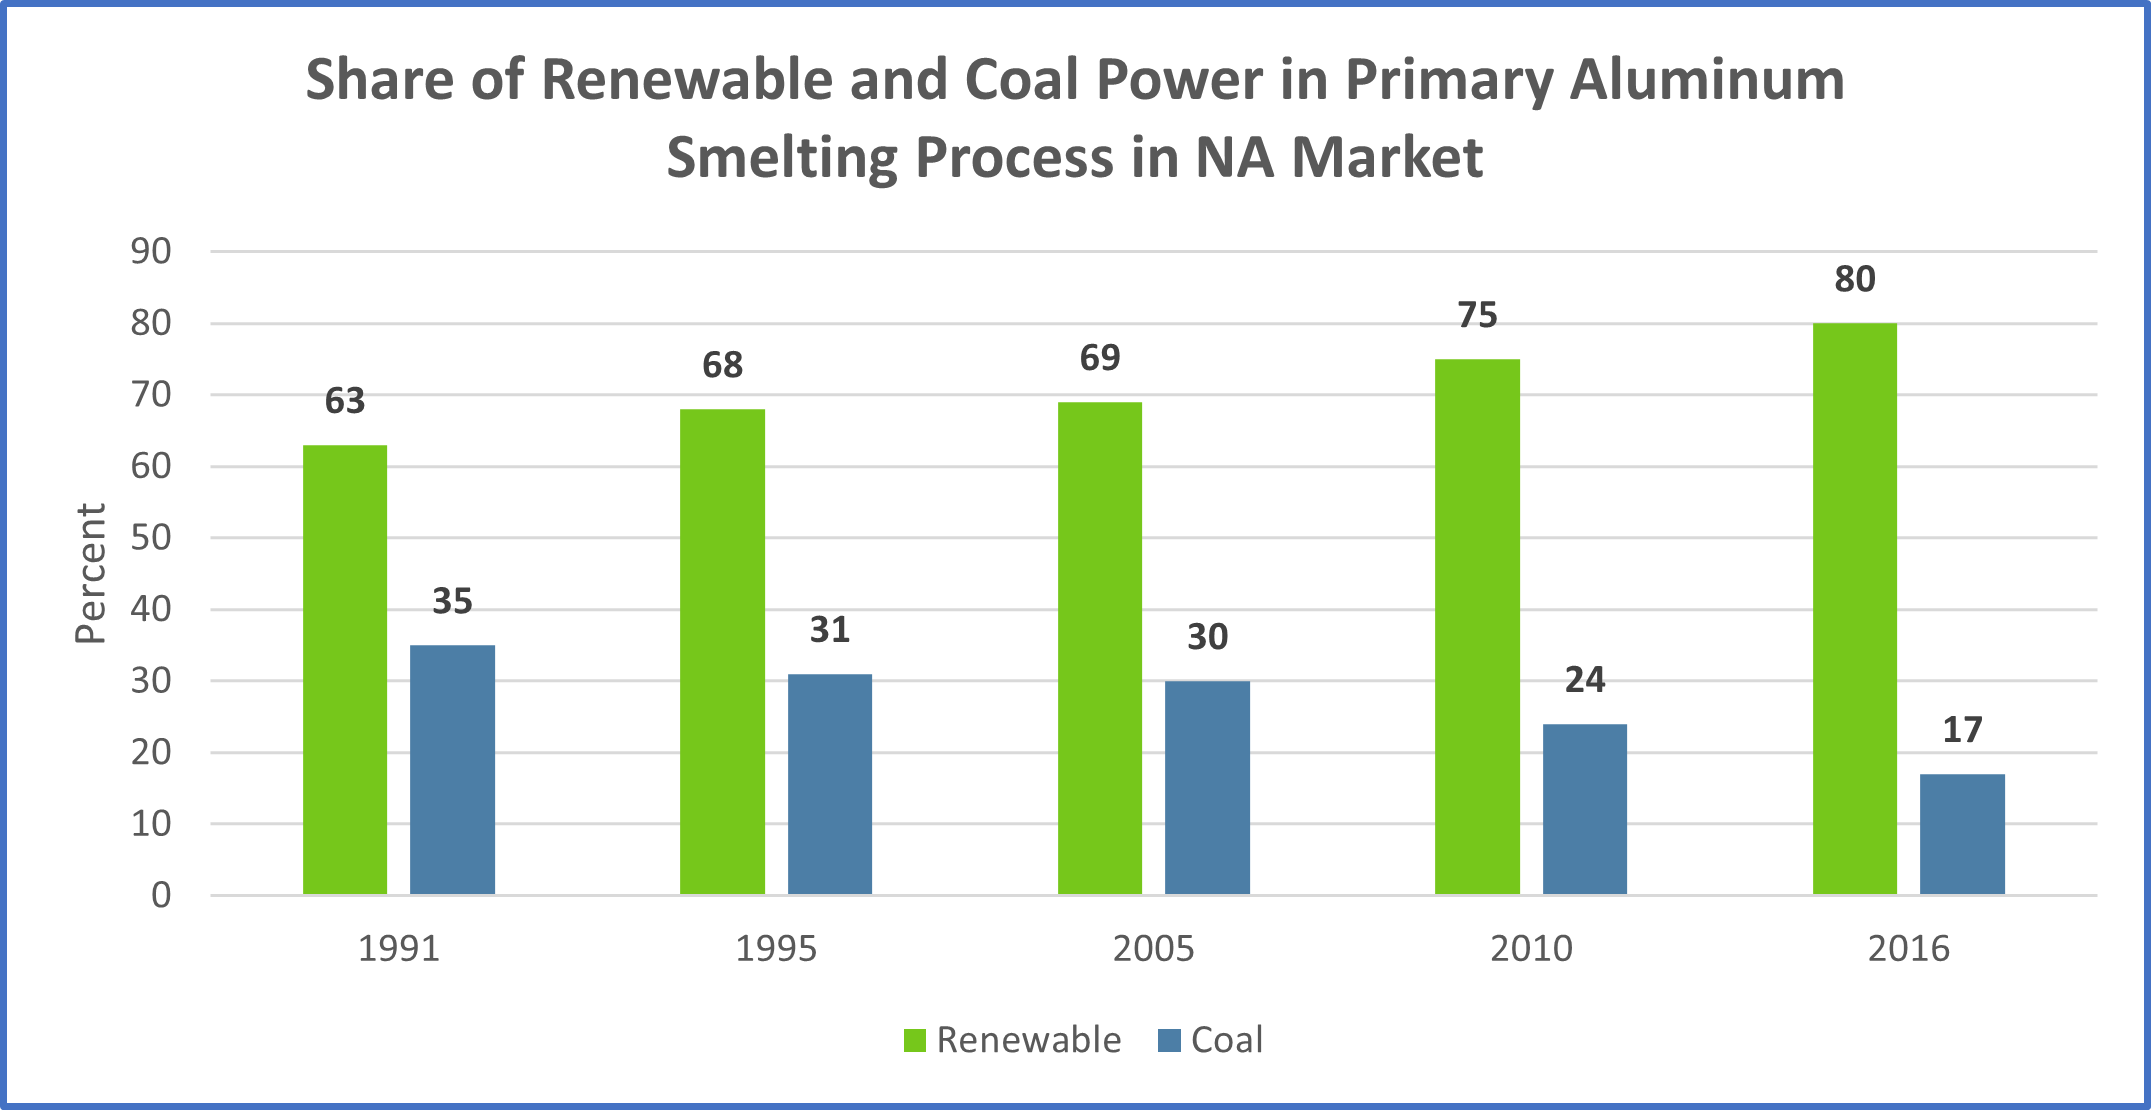 Chart showing share of renewable and coal power in primary aluminum smelting process